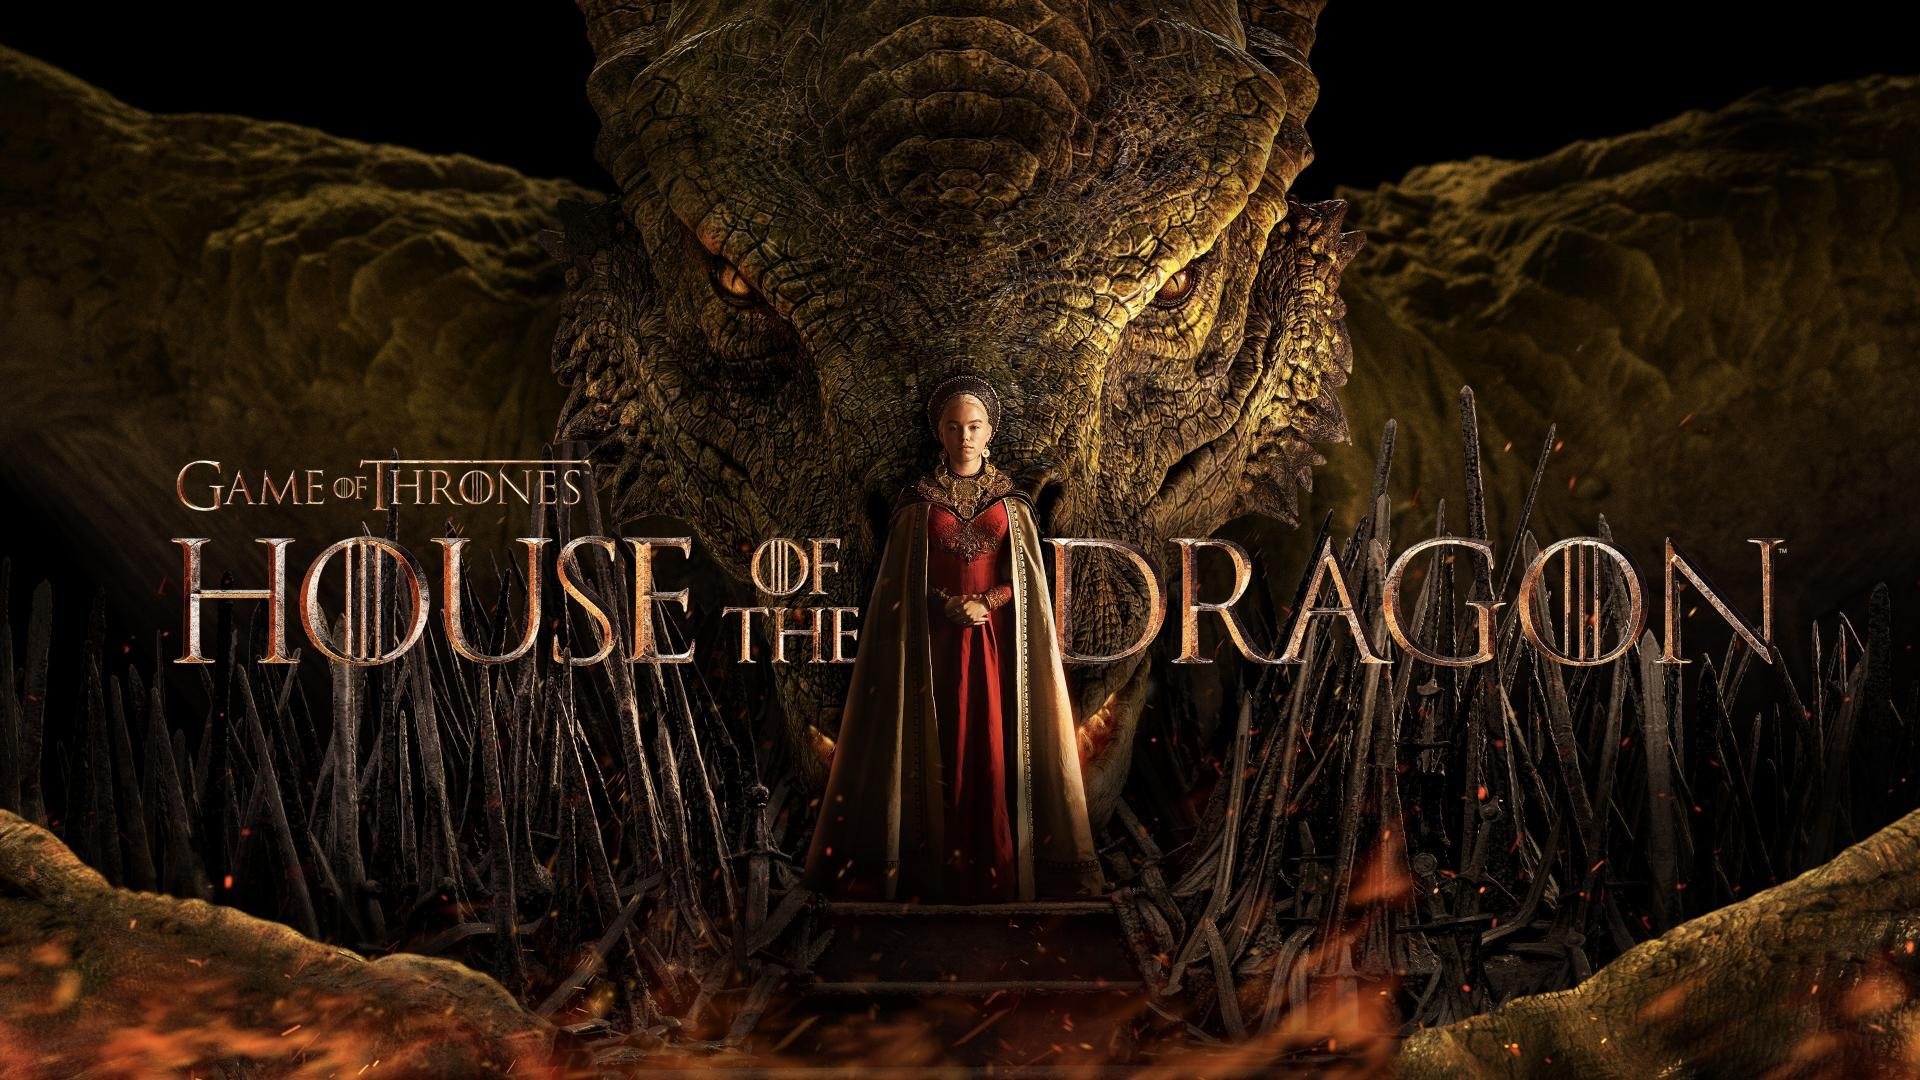 Watch House of the Dragon Season 1 Episode 1 Online - Stream Full